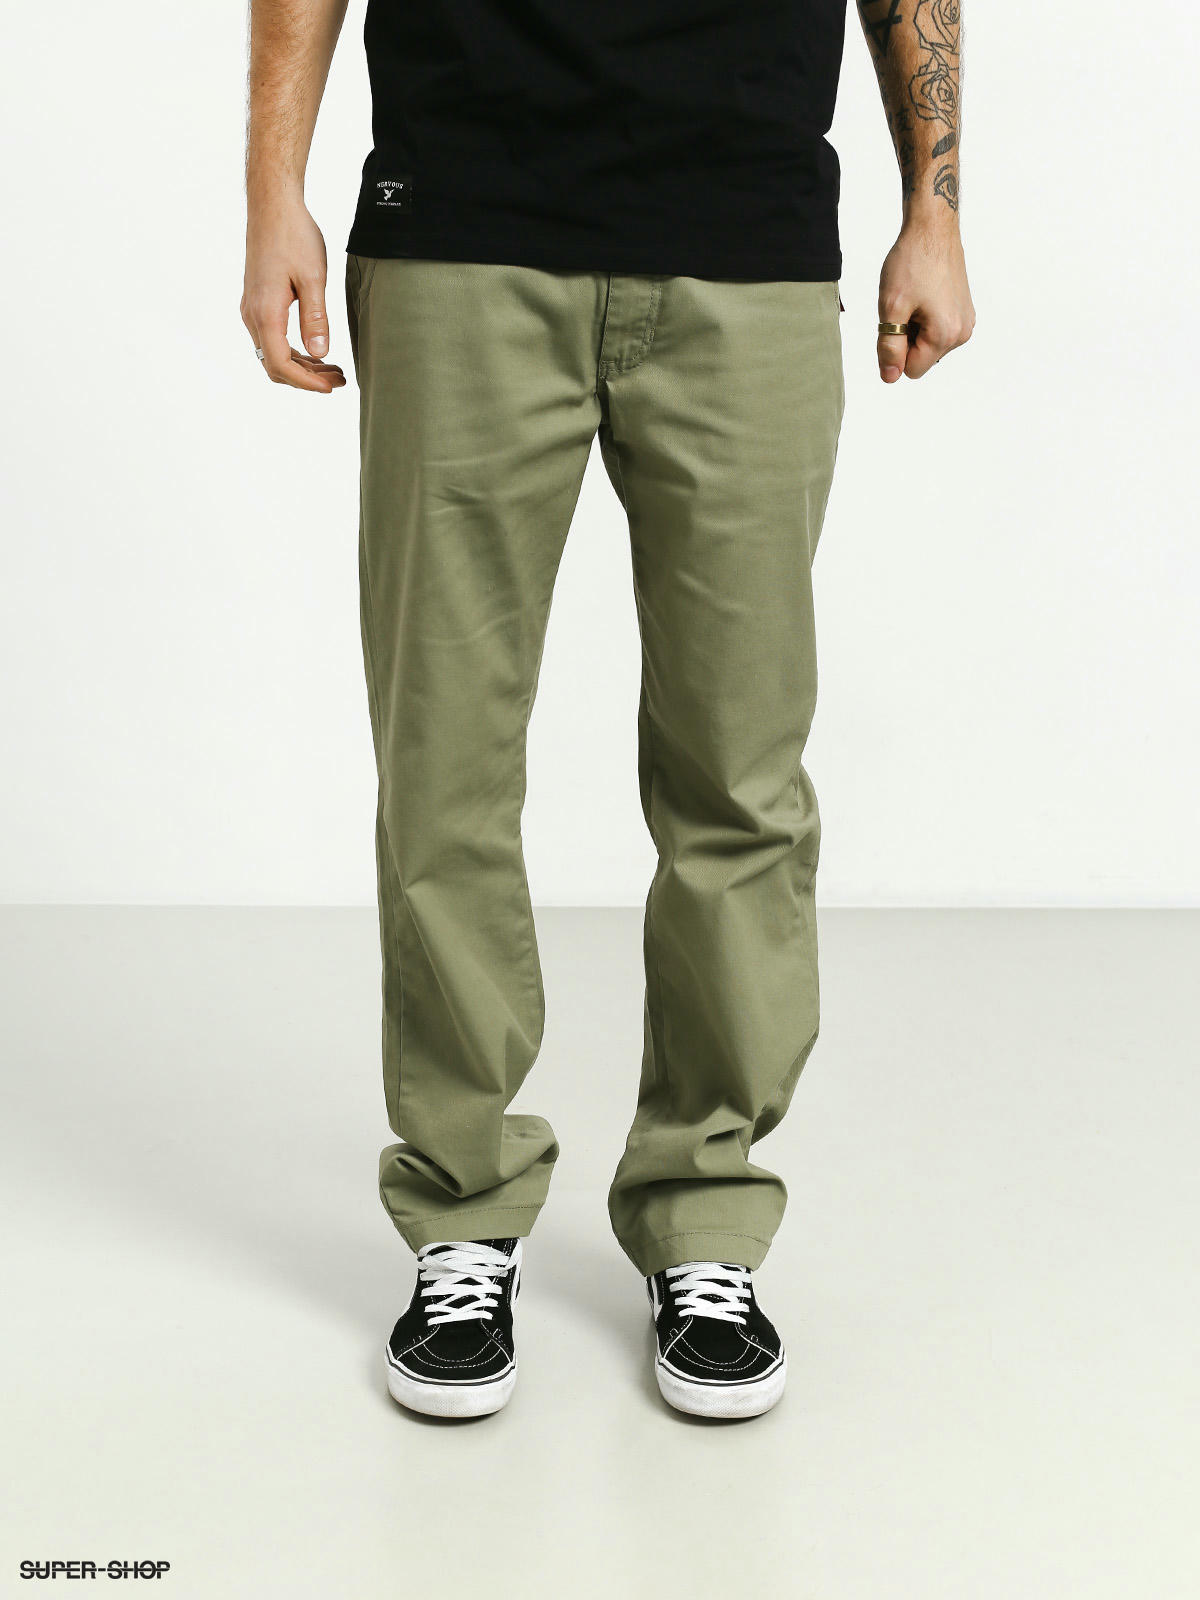 chino pants with vans